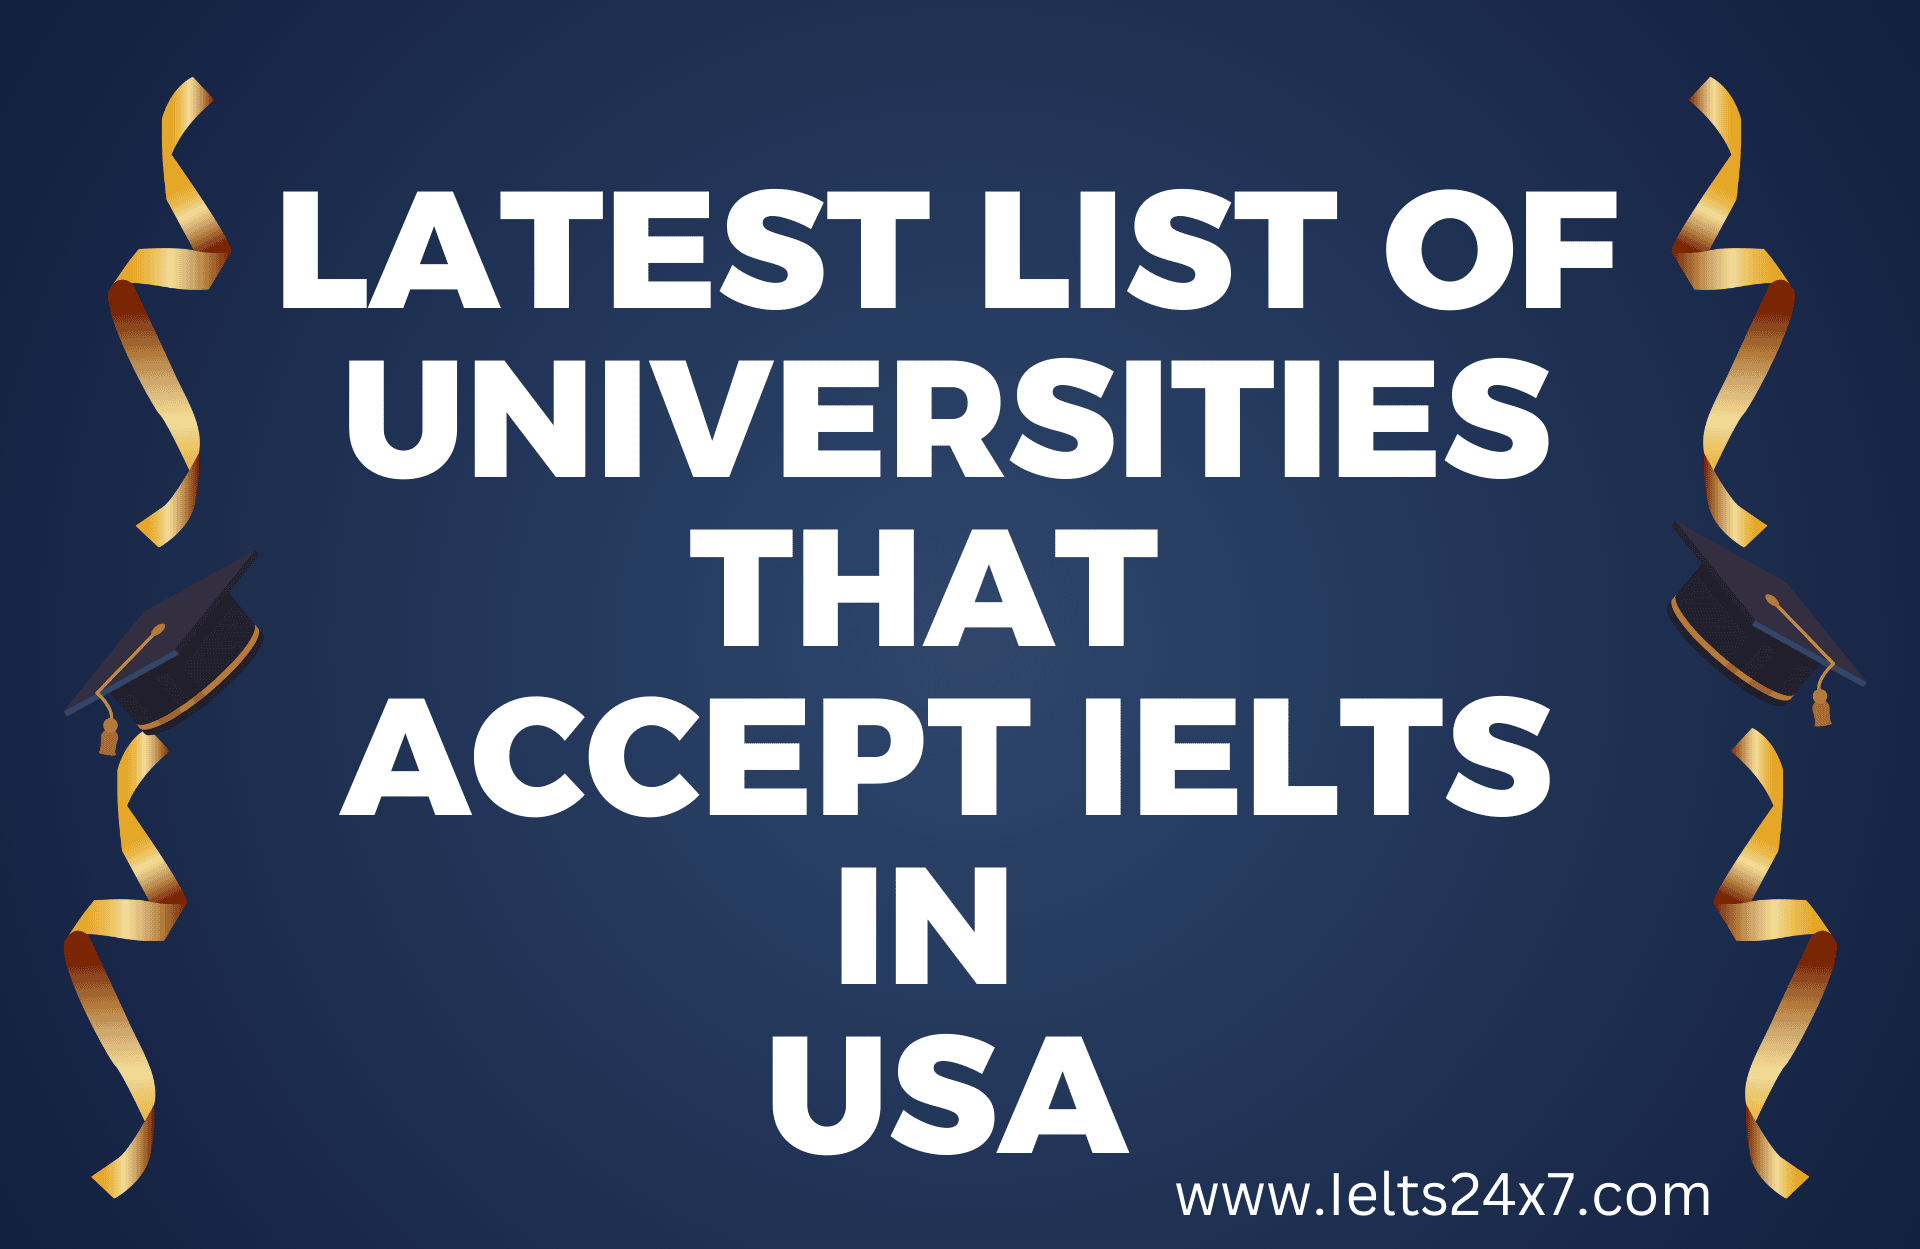 Latest List of Universities that Accept IELTS in USA